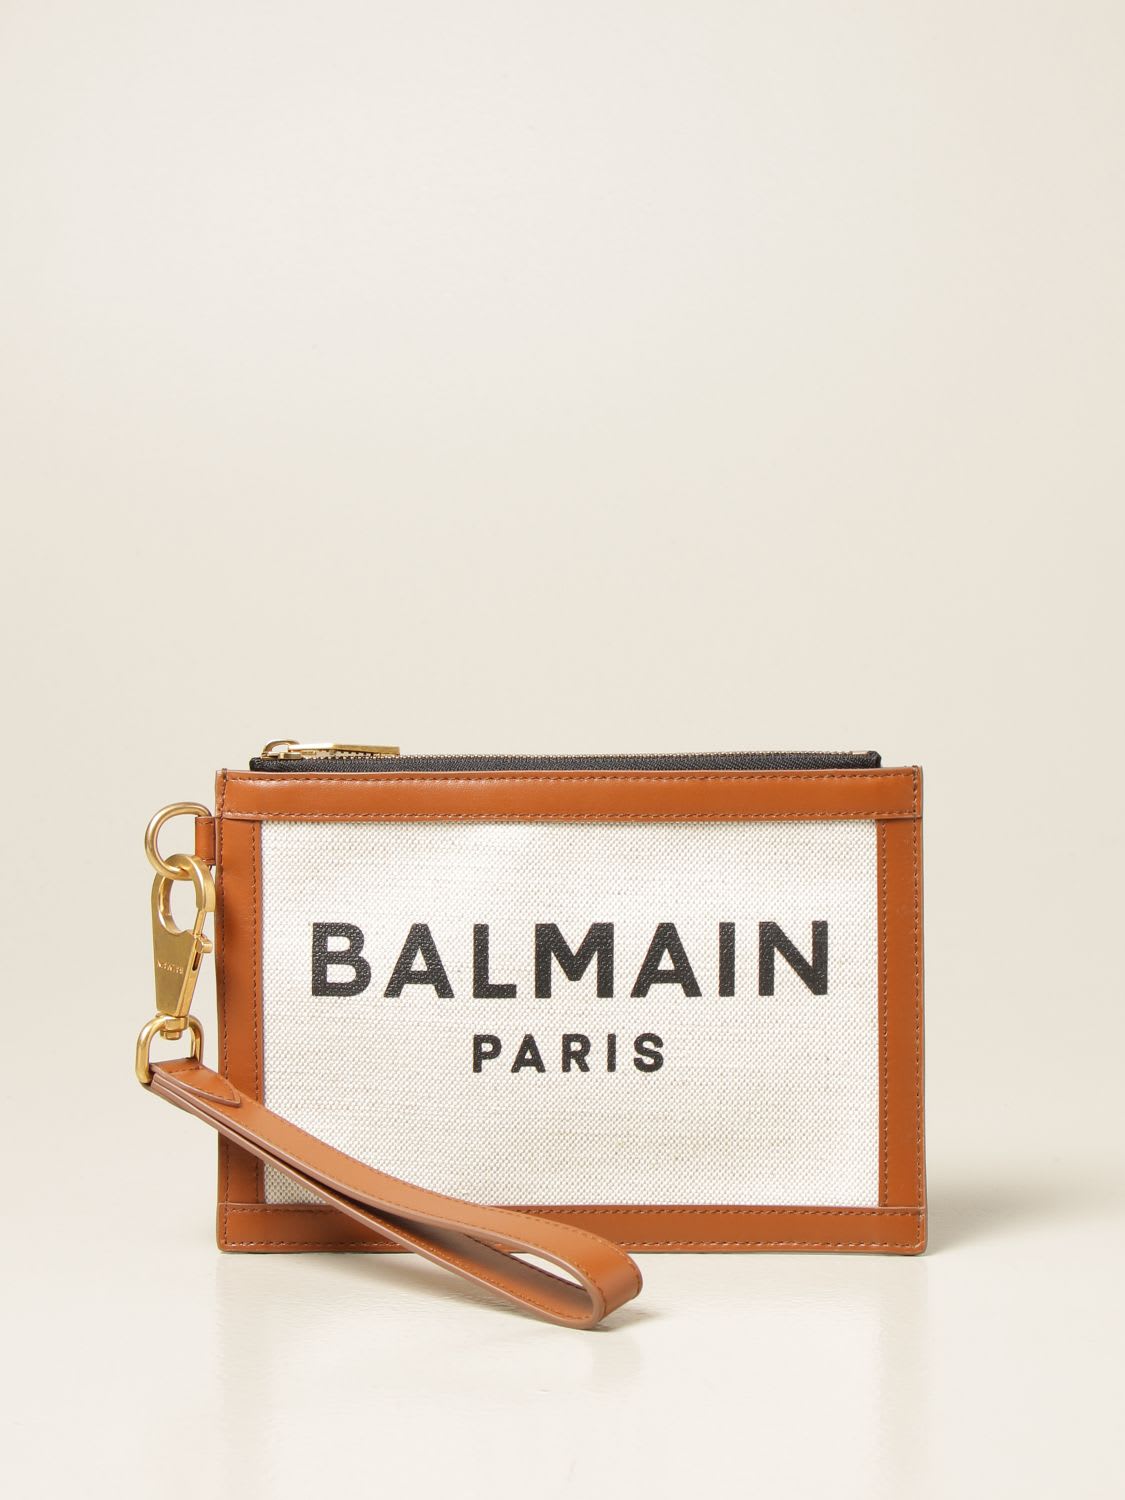 BALMAIN POUCH IN CANVAS AND LEATHER,VN0LA124TCFN GEM